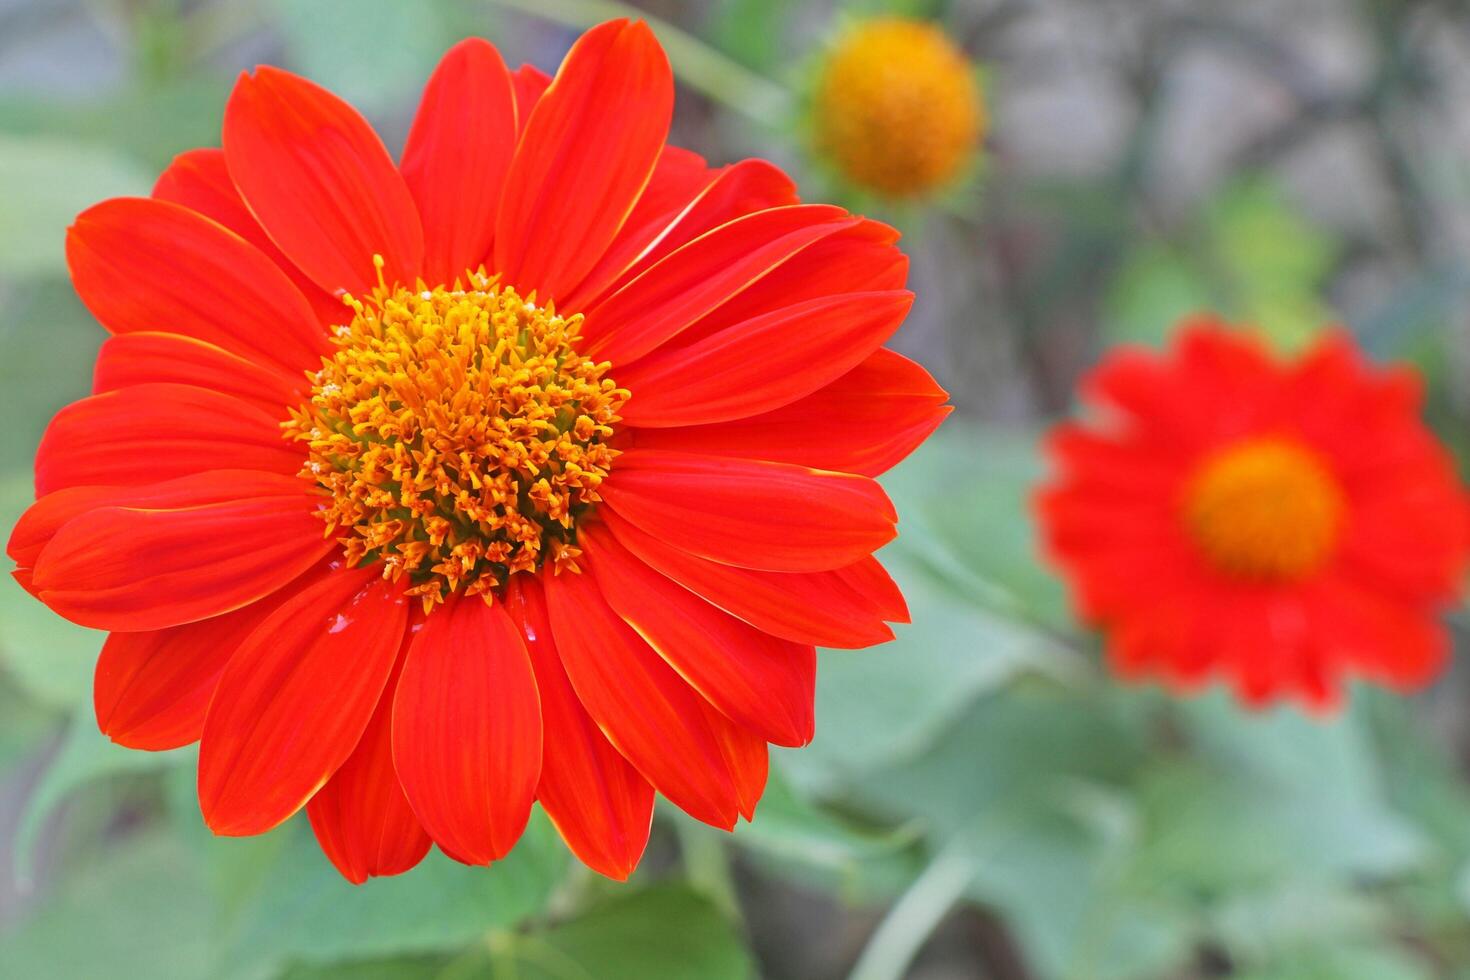 Red Mexican sunflower in the garden. Tithonia diversifolia. photo